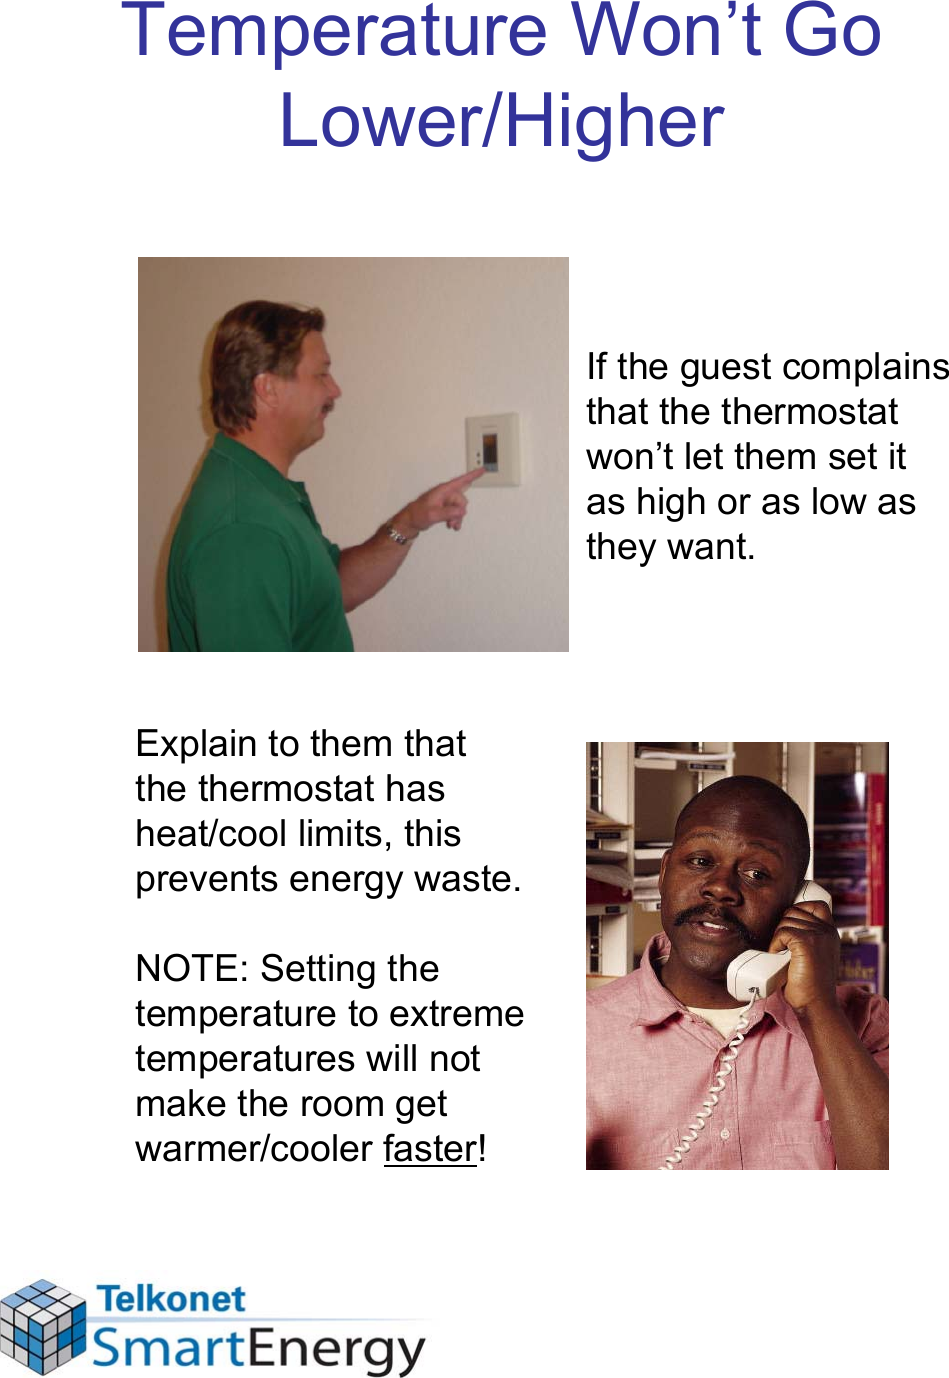 Temperature Won’t Go Lower/HigherIf the guest complains that the thermostat won’t let them set it as high or as low as they want.Explain to them that the thermostat has heat/cool limits, this prevents energy waste. NOTE: Setting the temperature to extreme temperatures will not make the room get warmer/cooler faster!